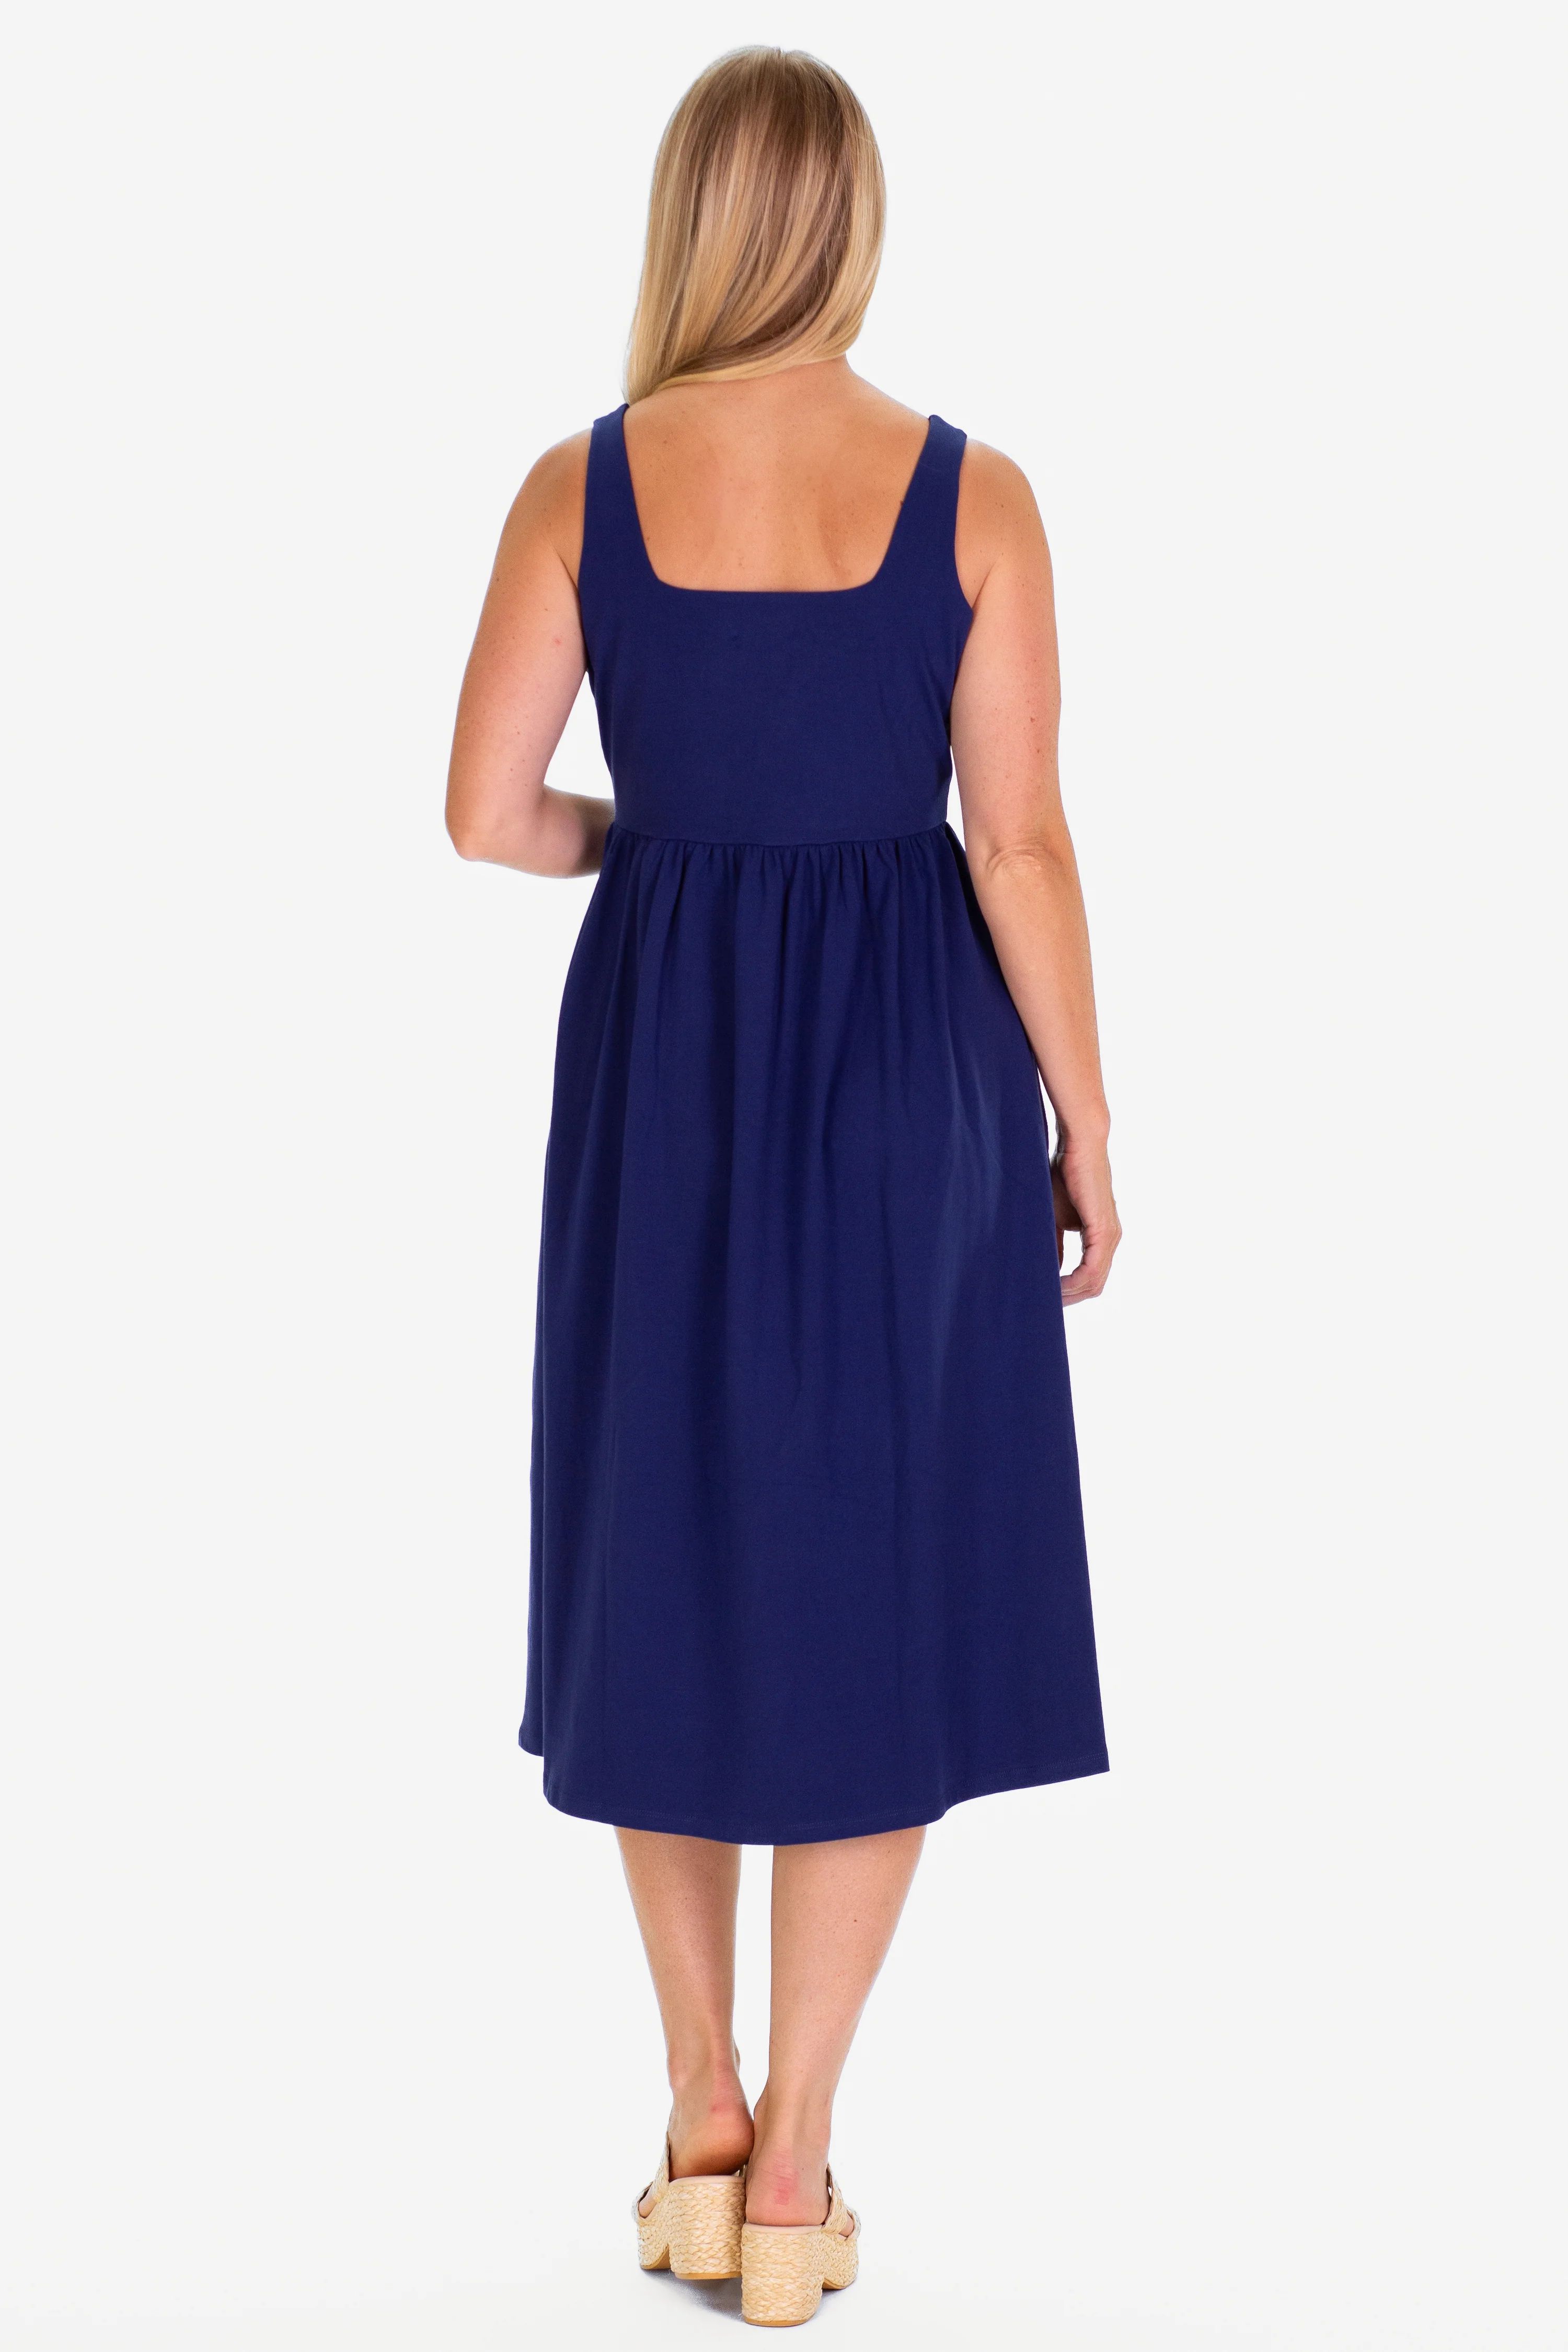 The Maebelle Dress in Royal Navy | Duffield Lane